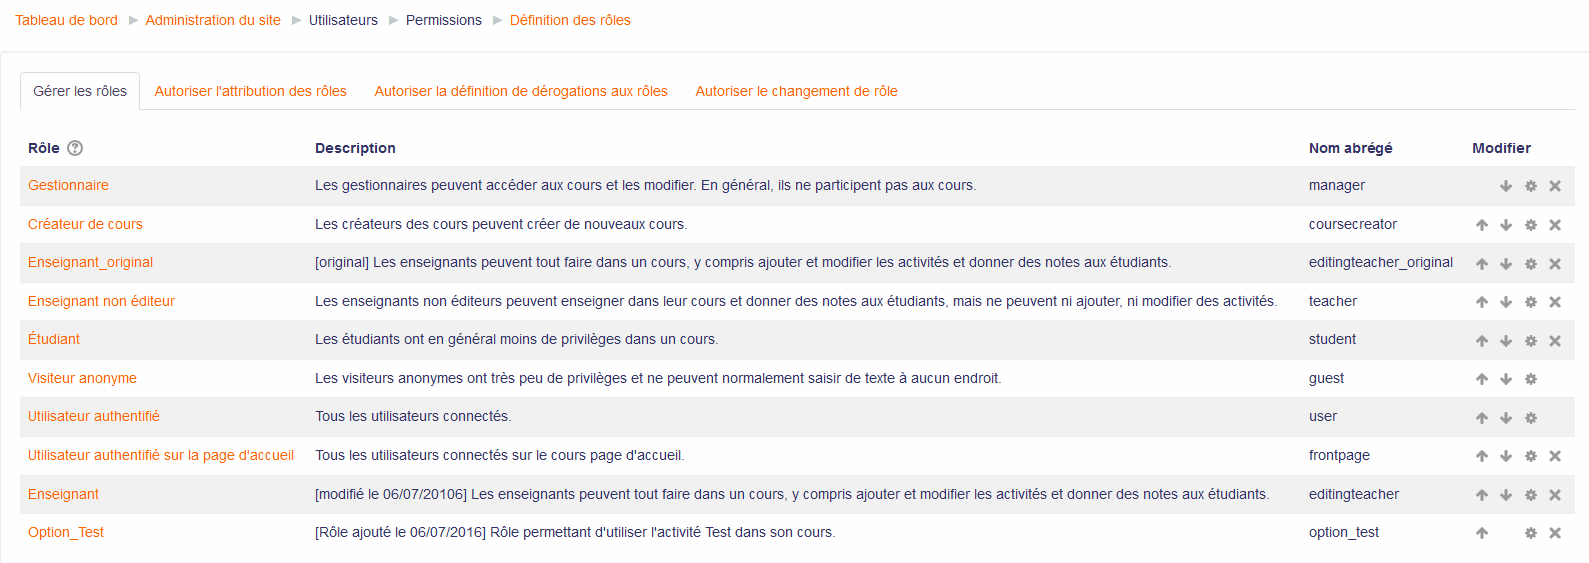 gestion role.png